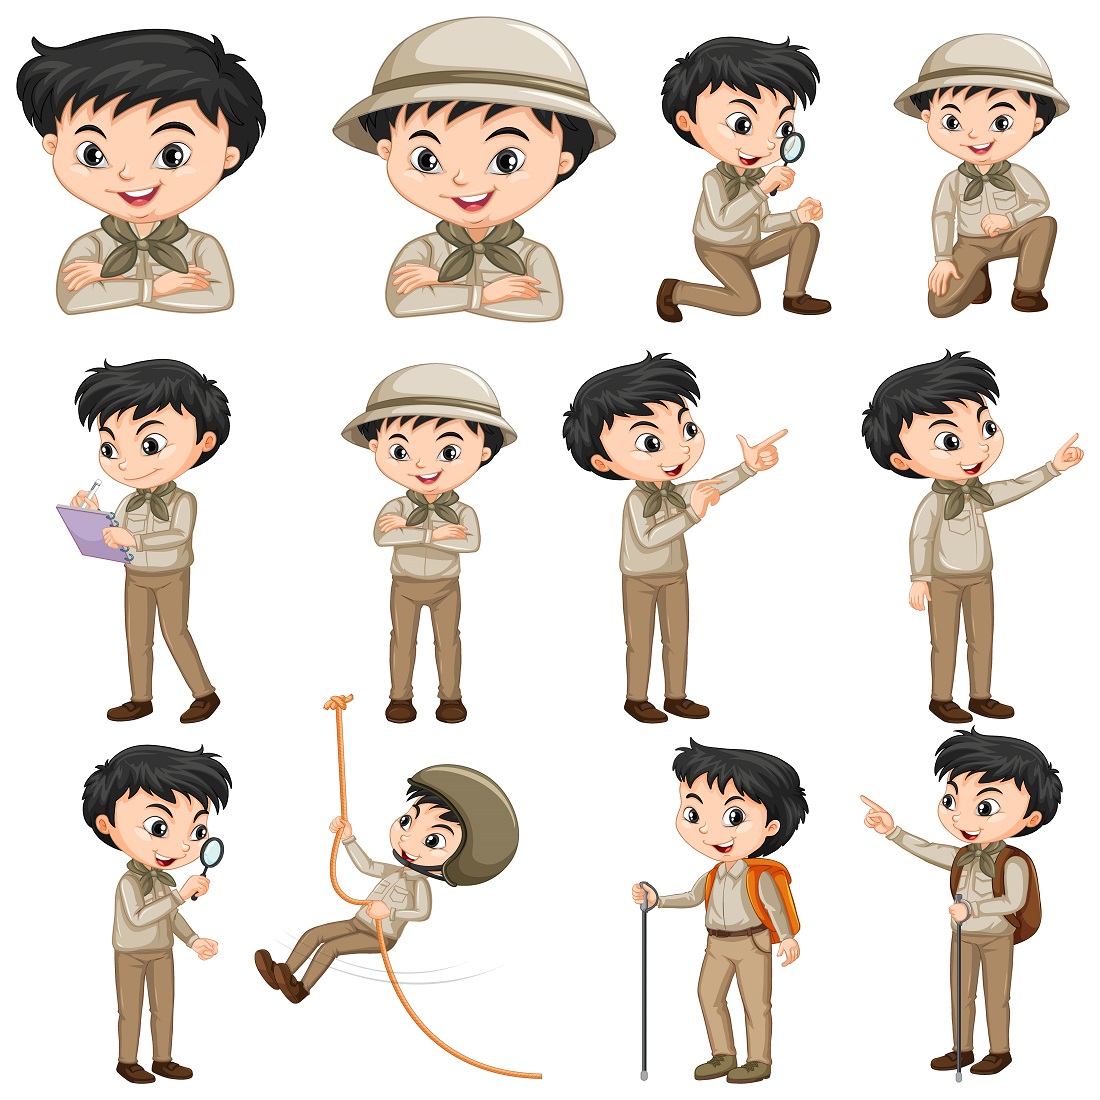 Boy safari outfit doing different activities preview image.